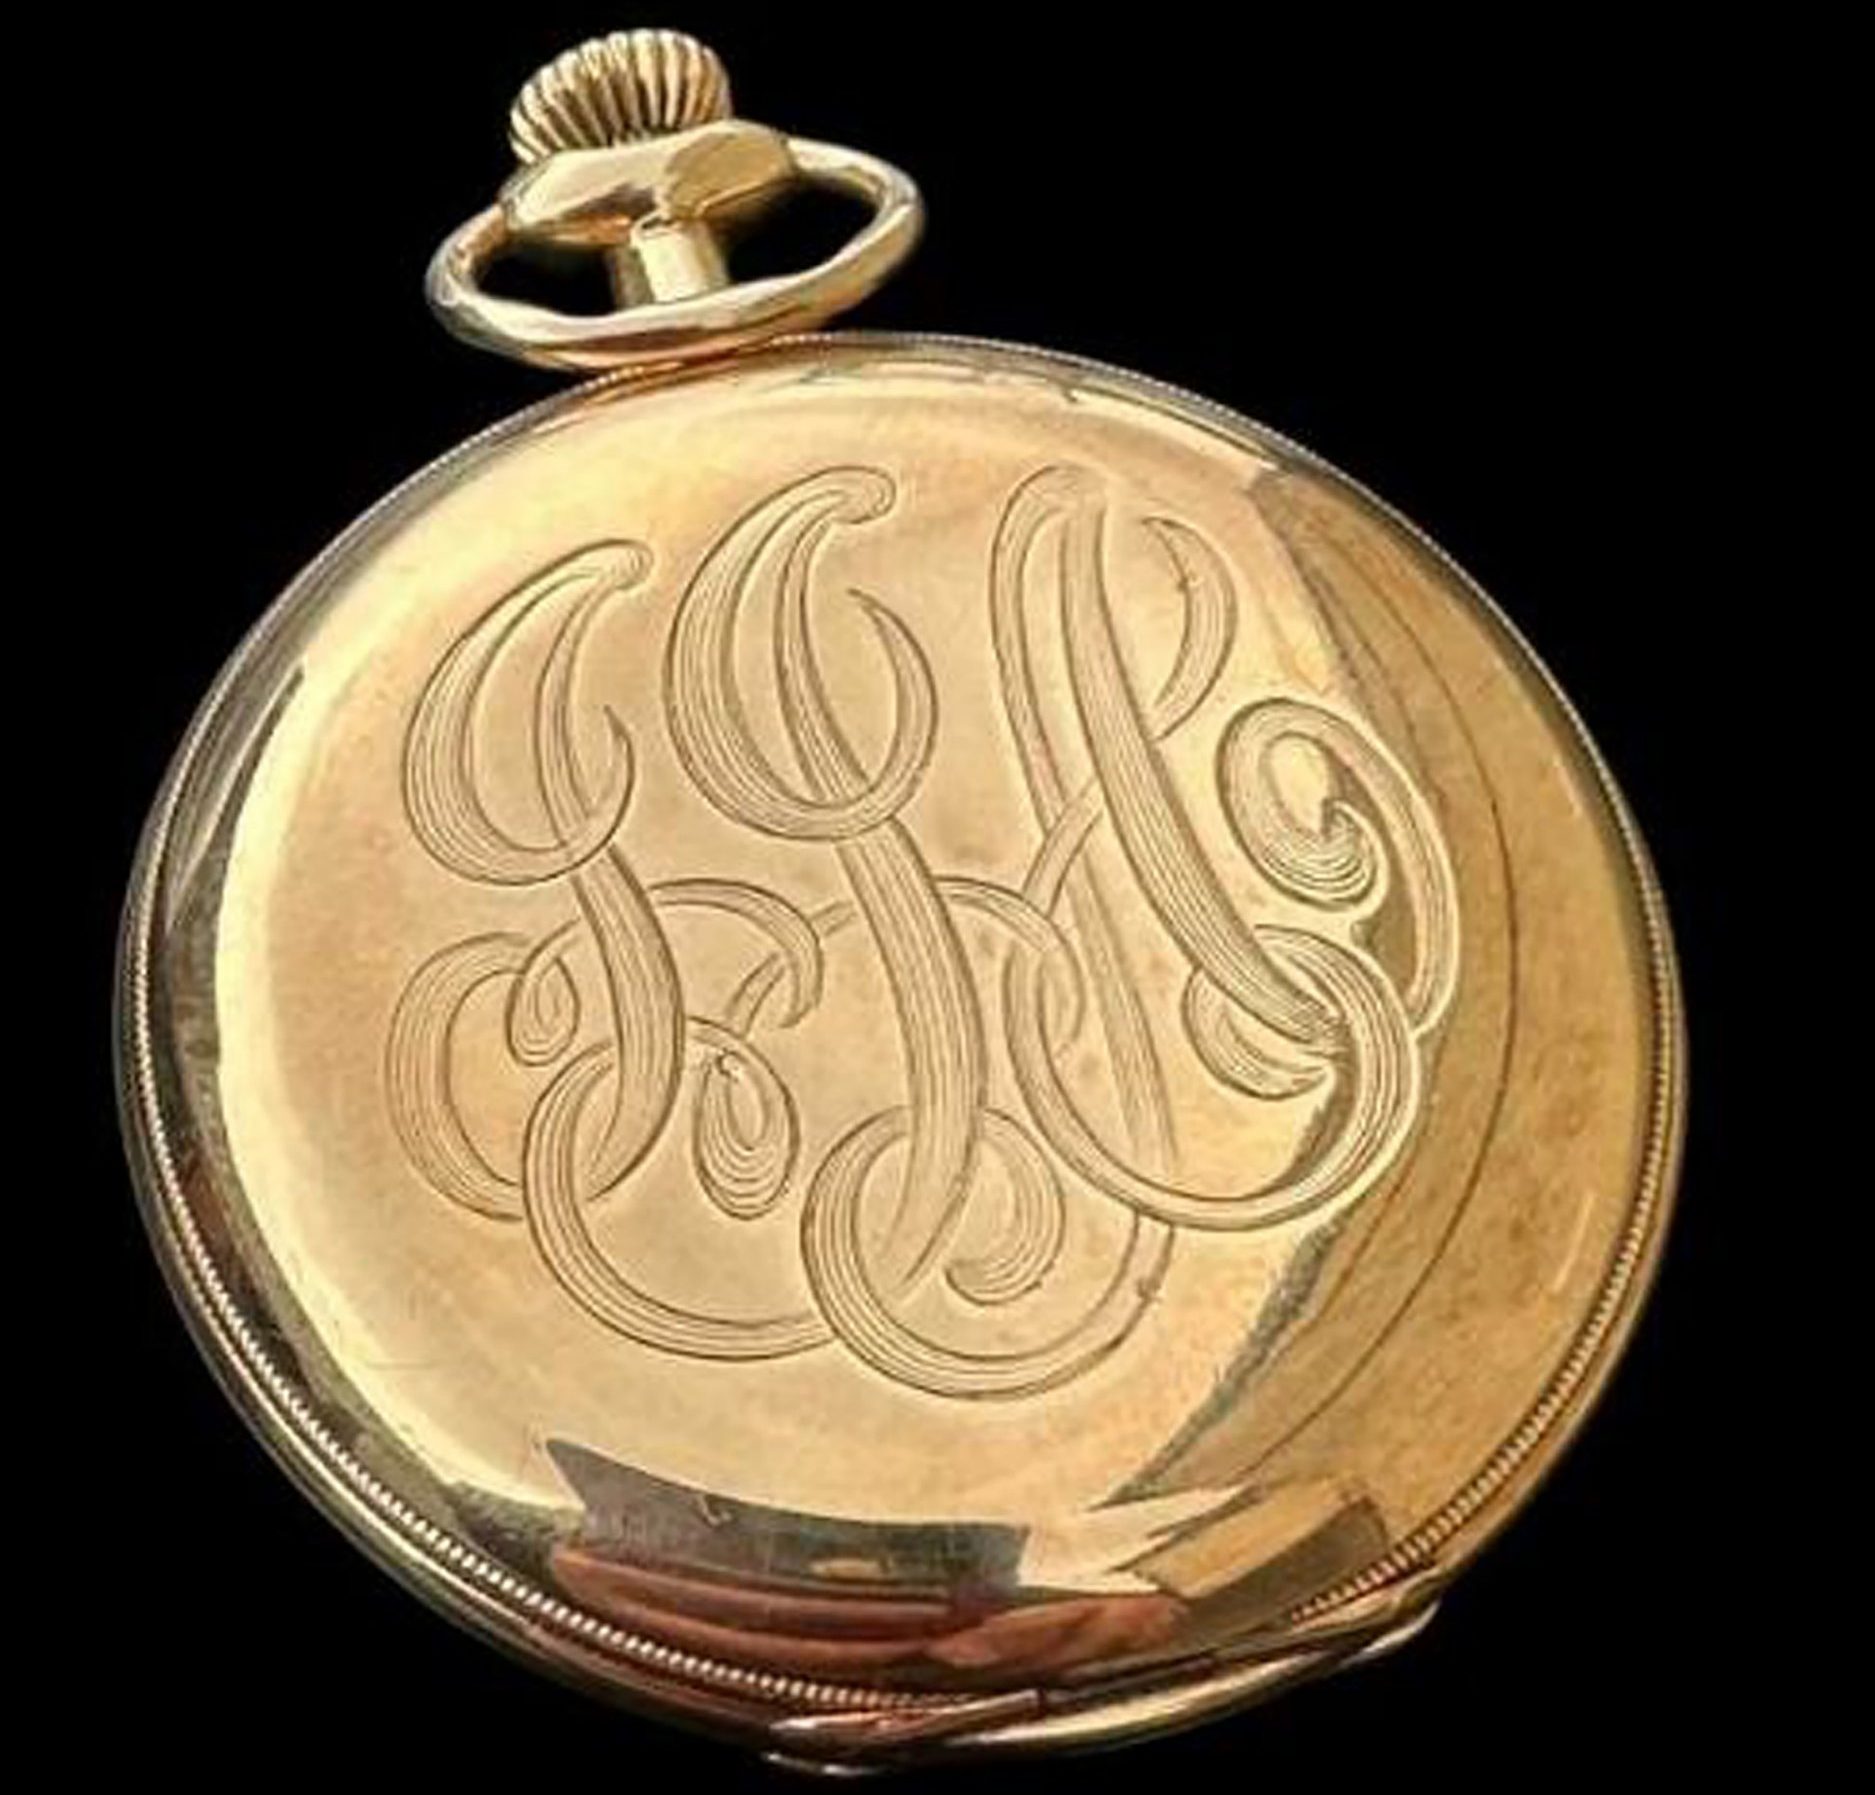 gold pocketwatch belonging to titanic's richest passenger sells for £1,175,000